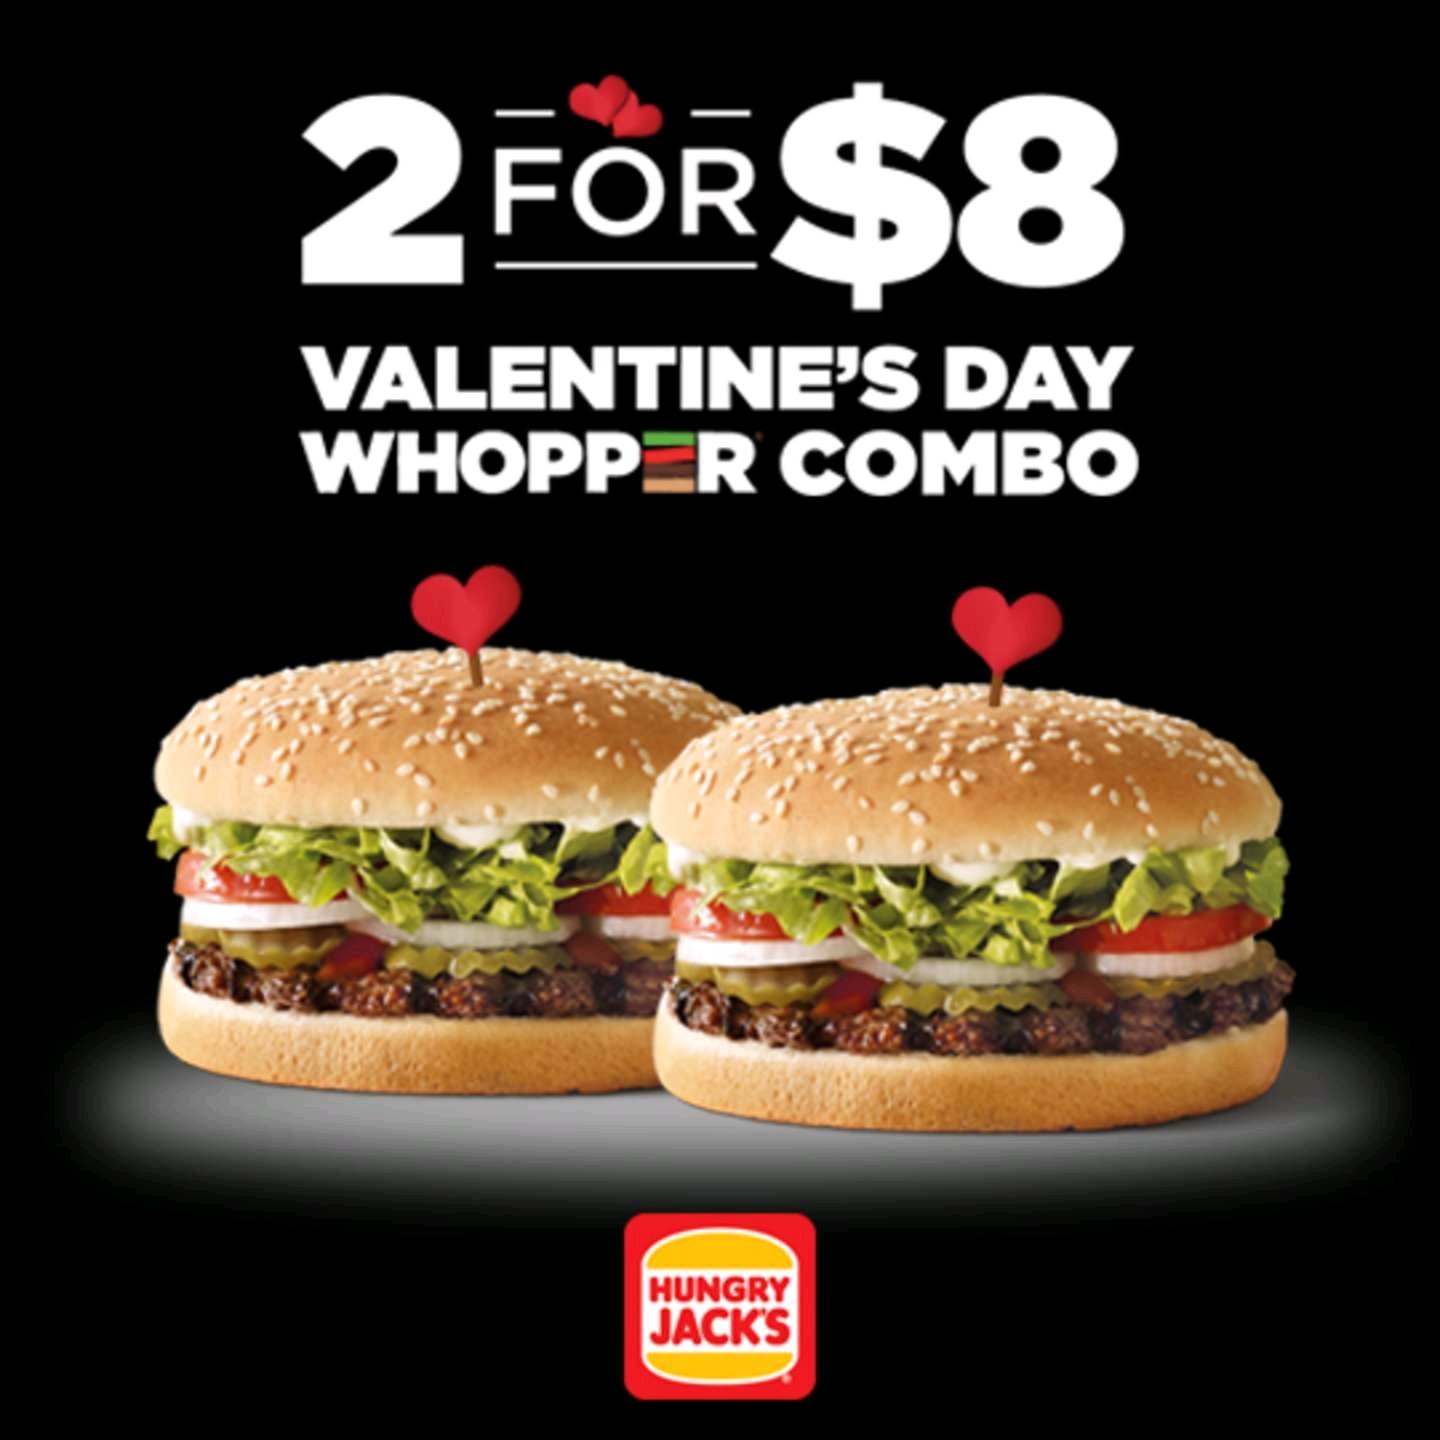 DEAL: Hungry Jack's Valentines Day - 2 Whoppers for $8 3